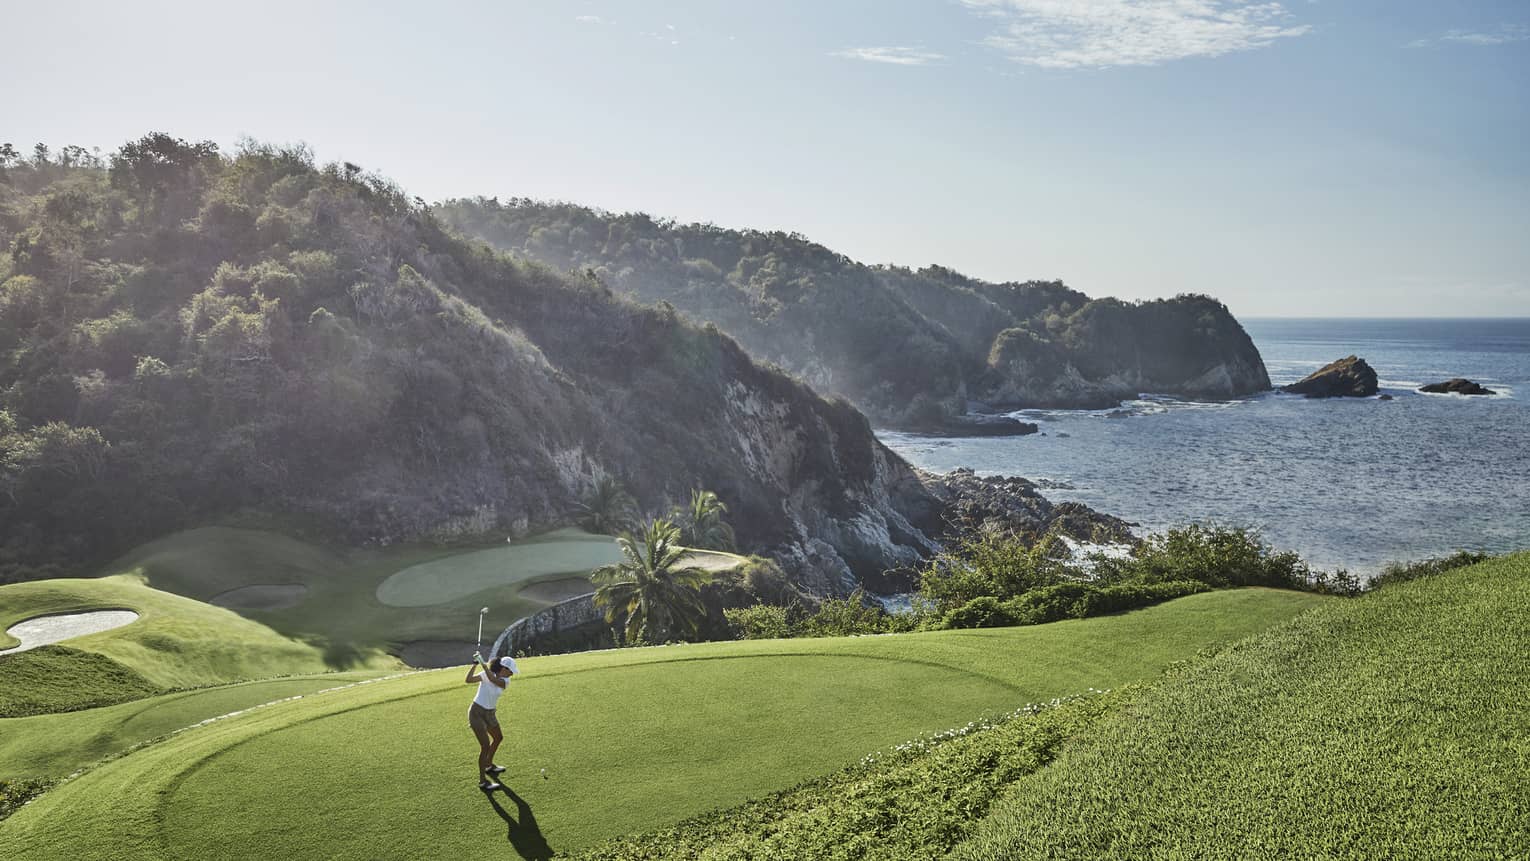 Golfer in mid-backswing, ready to strike toward a distant green at the base of an immense forested hill bordering the ocean. 